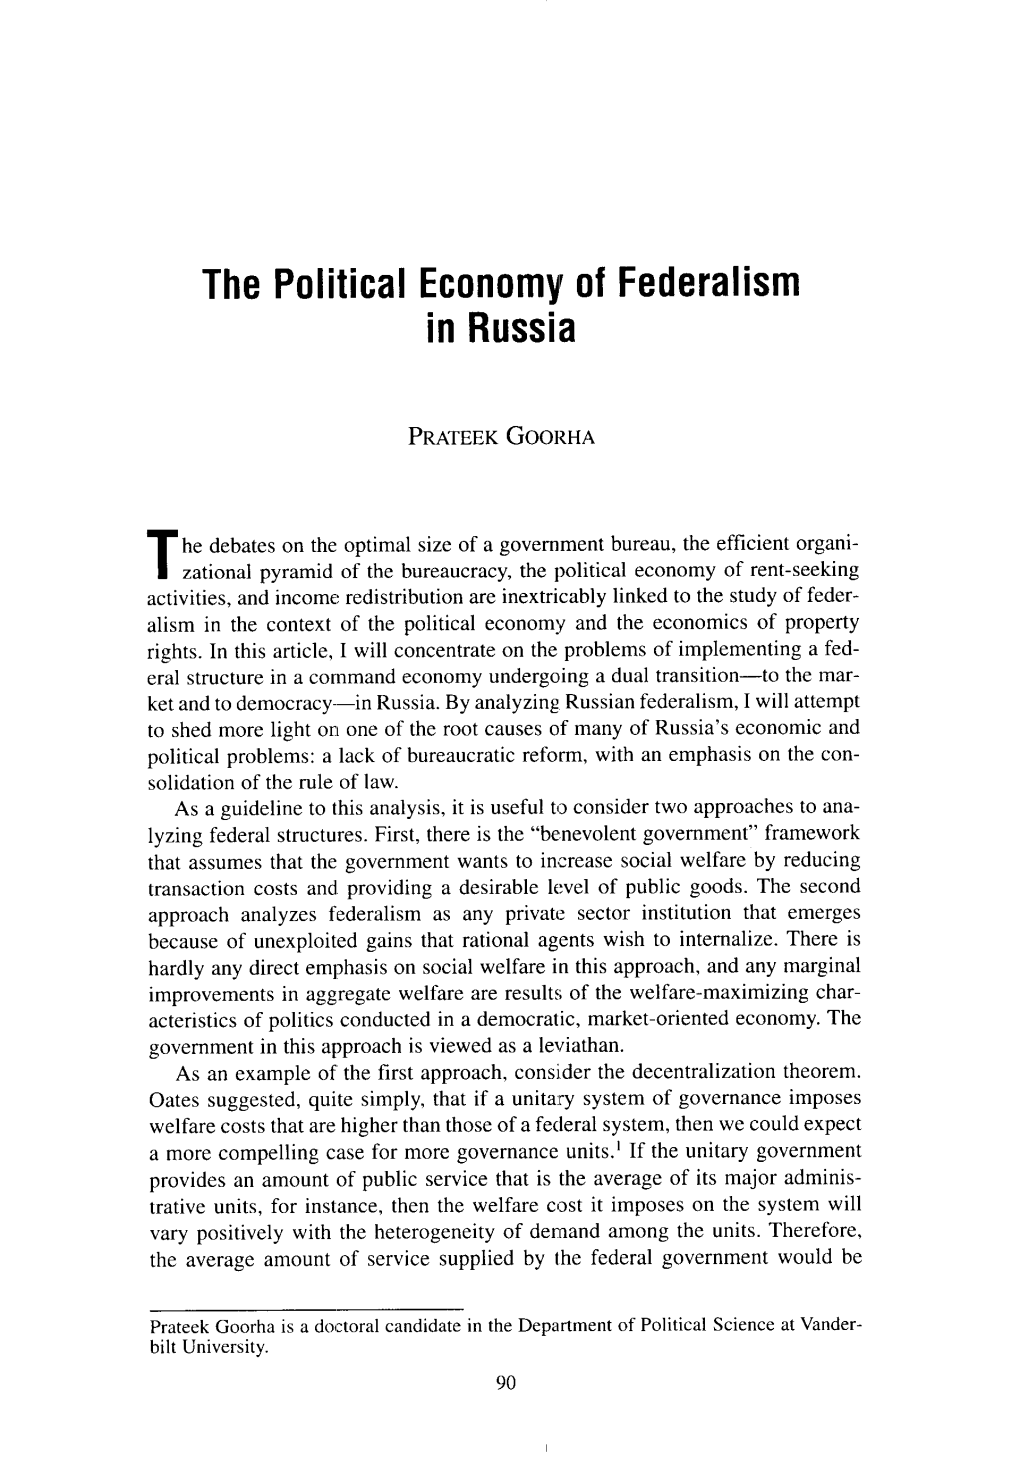 The Political Economy^ of Federalism in Russia